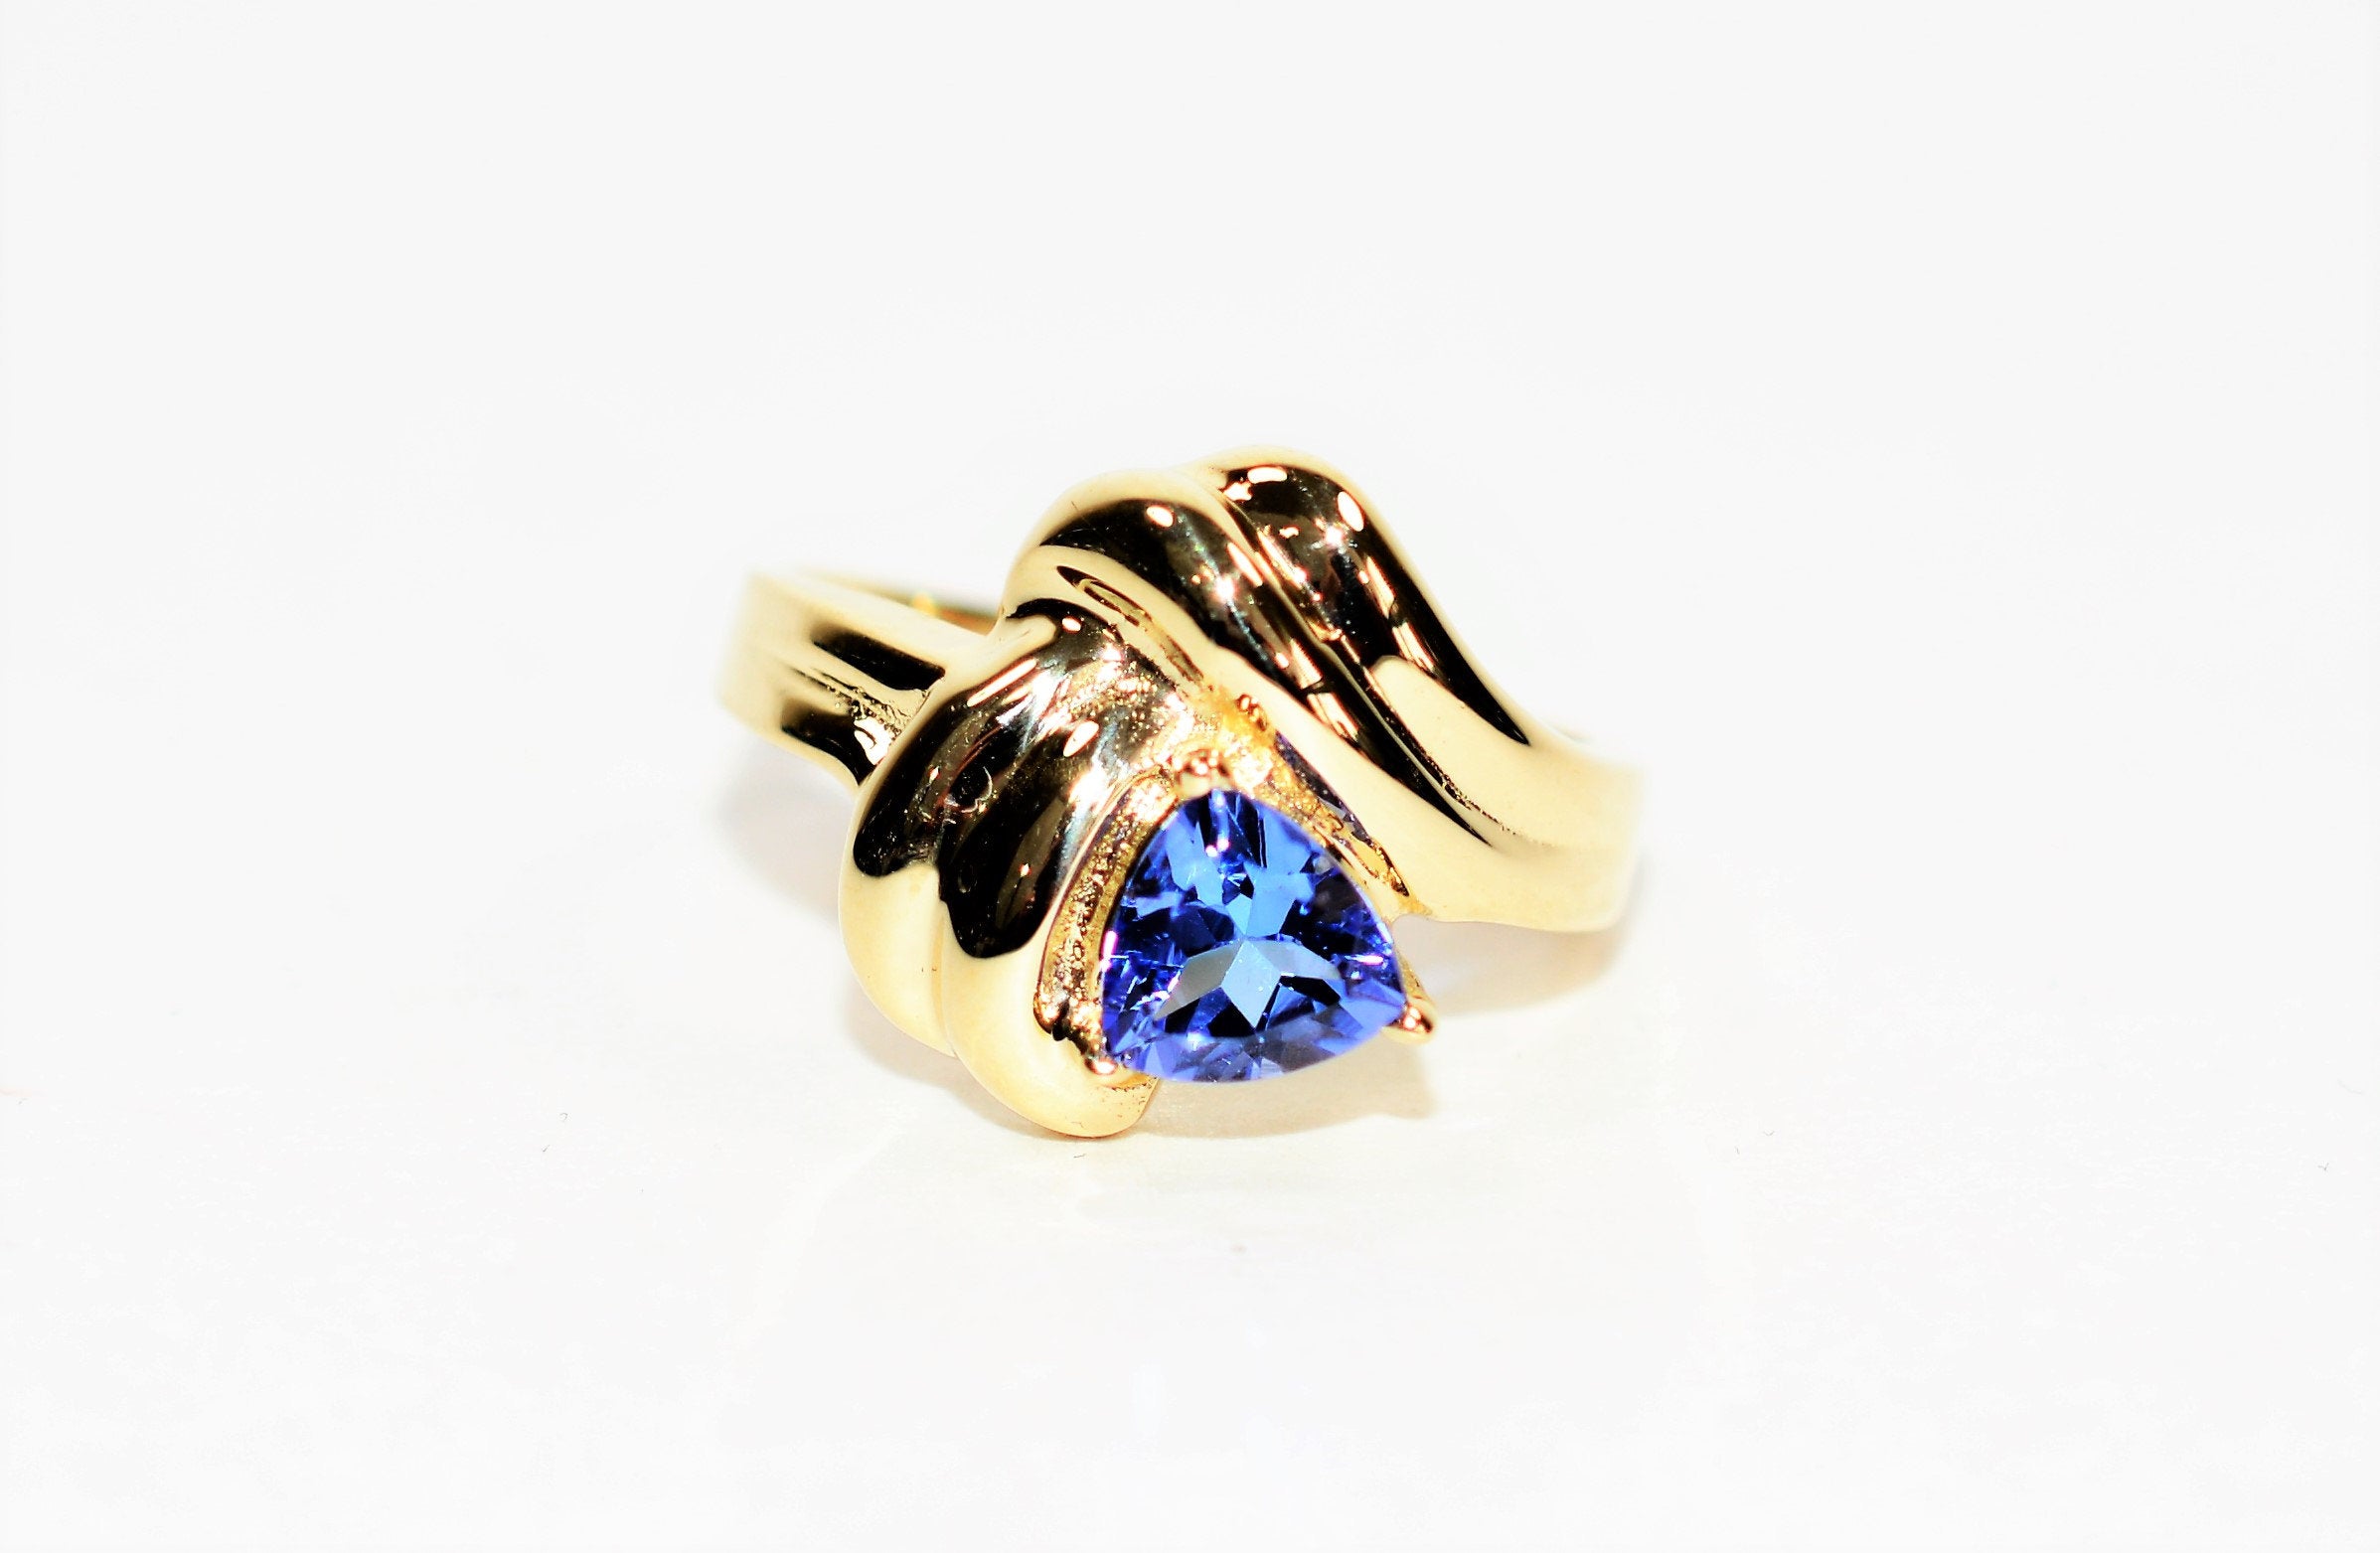 Natural Tanzanite Ring 14K Solid Gold 1ct Solitaire Ring Gemstone Ring Vintage Ring Estate Ring December Birthstone Ring Jewellery Jewelry